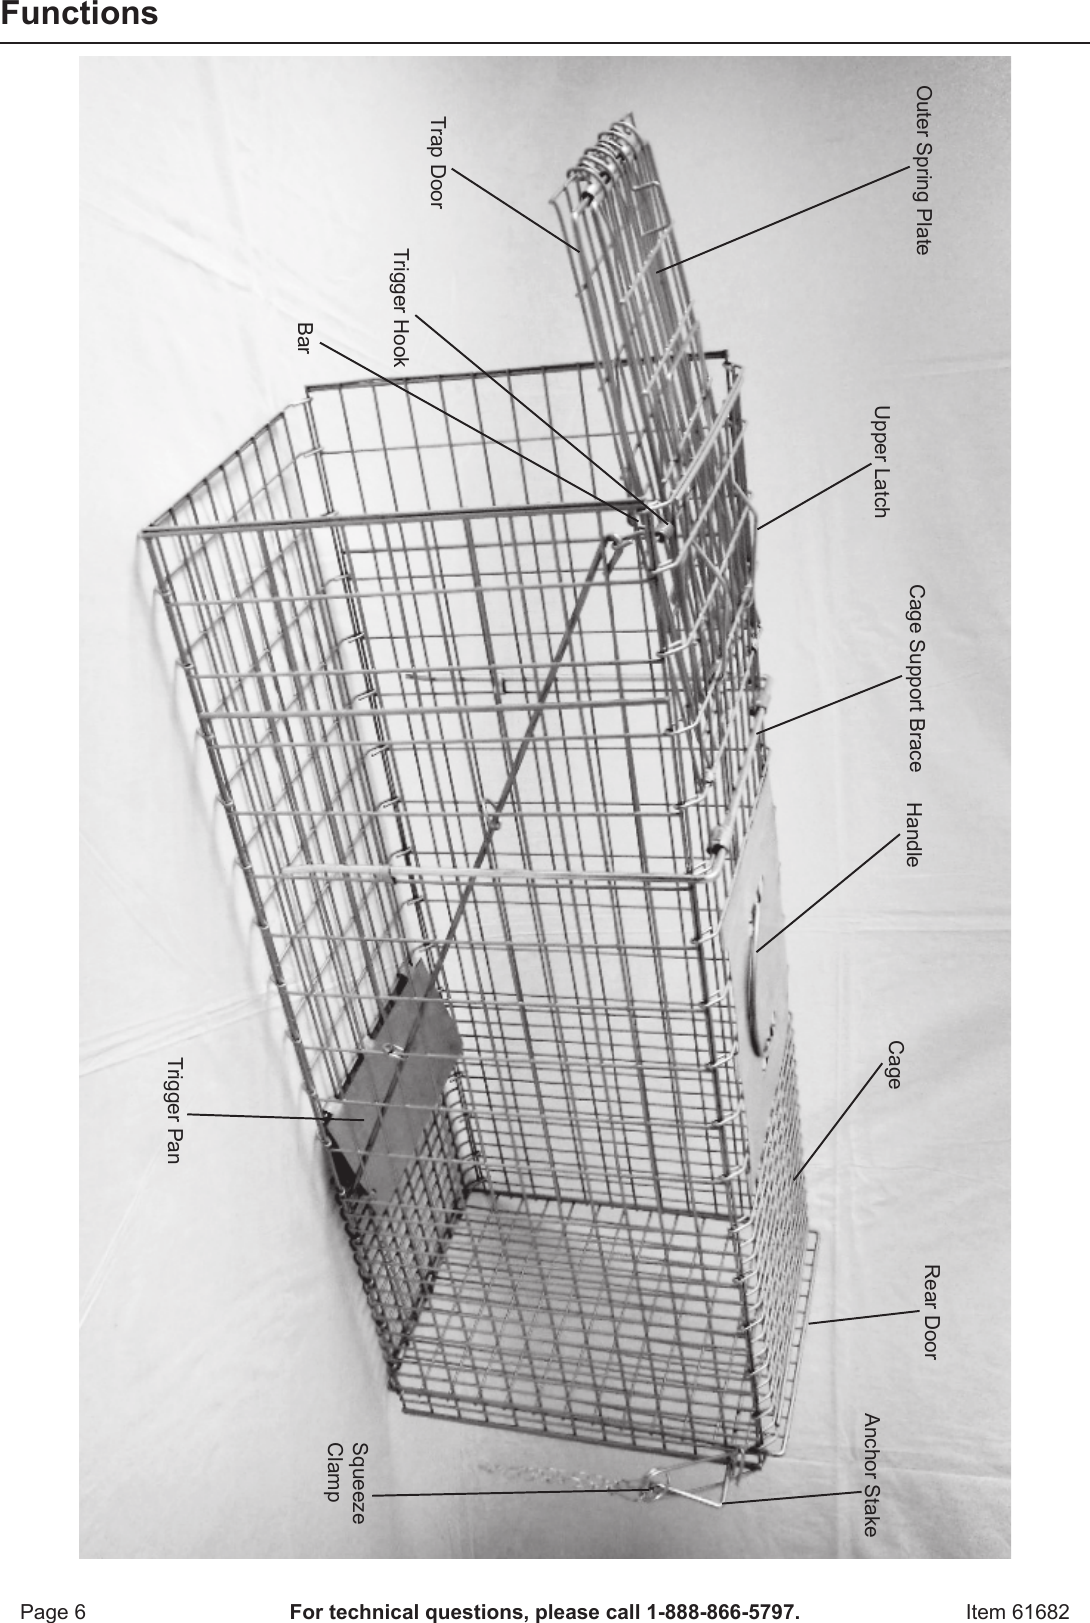 Page 6 of 8 - Harbor-Freight Harbor-Freight-32-In-X-15-In-X-10-In-Medium-Animal-Trap-Product-Manual-  Harbor-freight-32-in-x-15-in-x-10-in-medium-animal-trap-product-manual